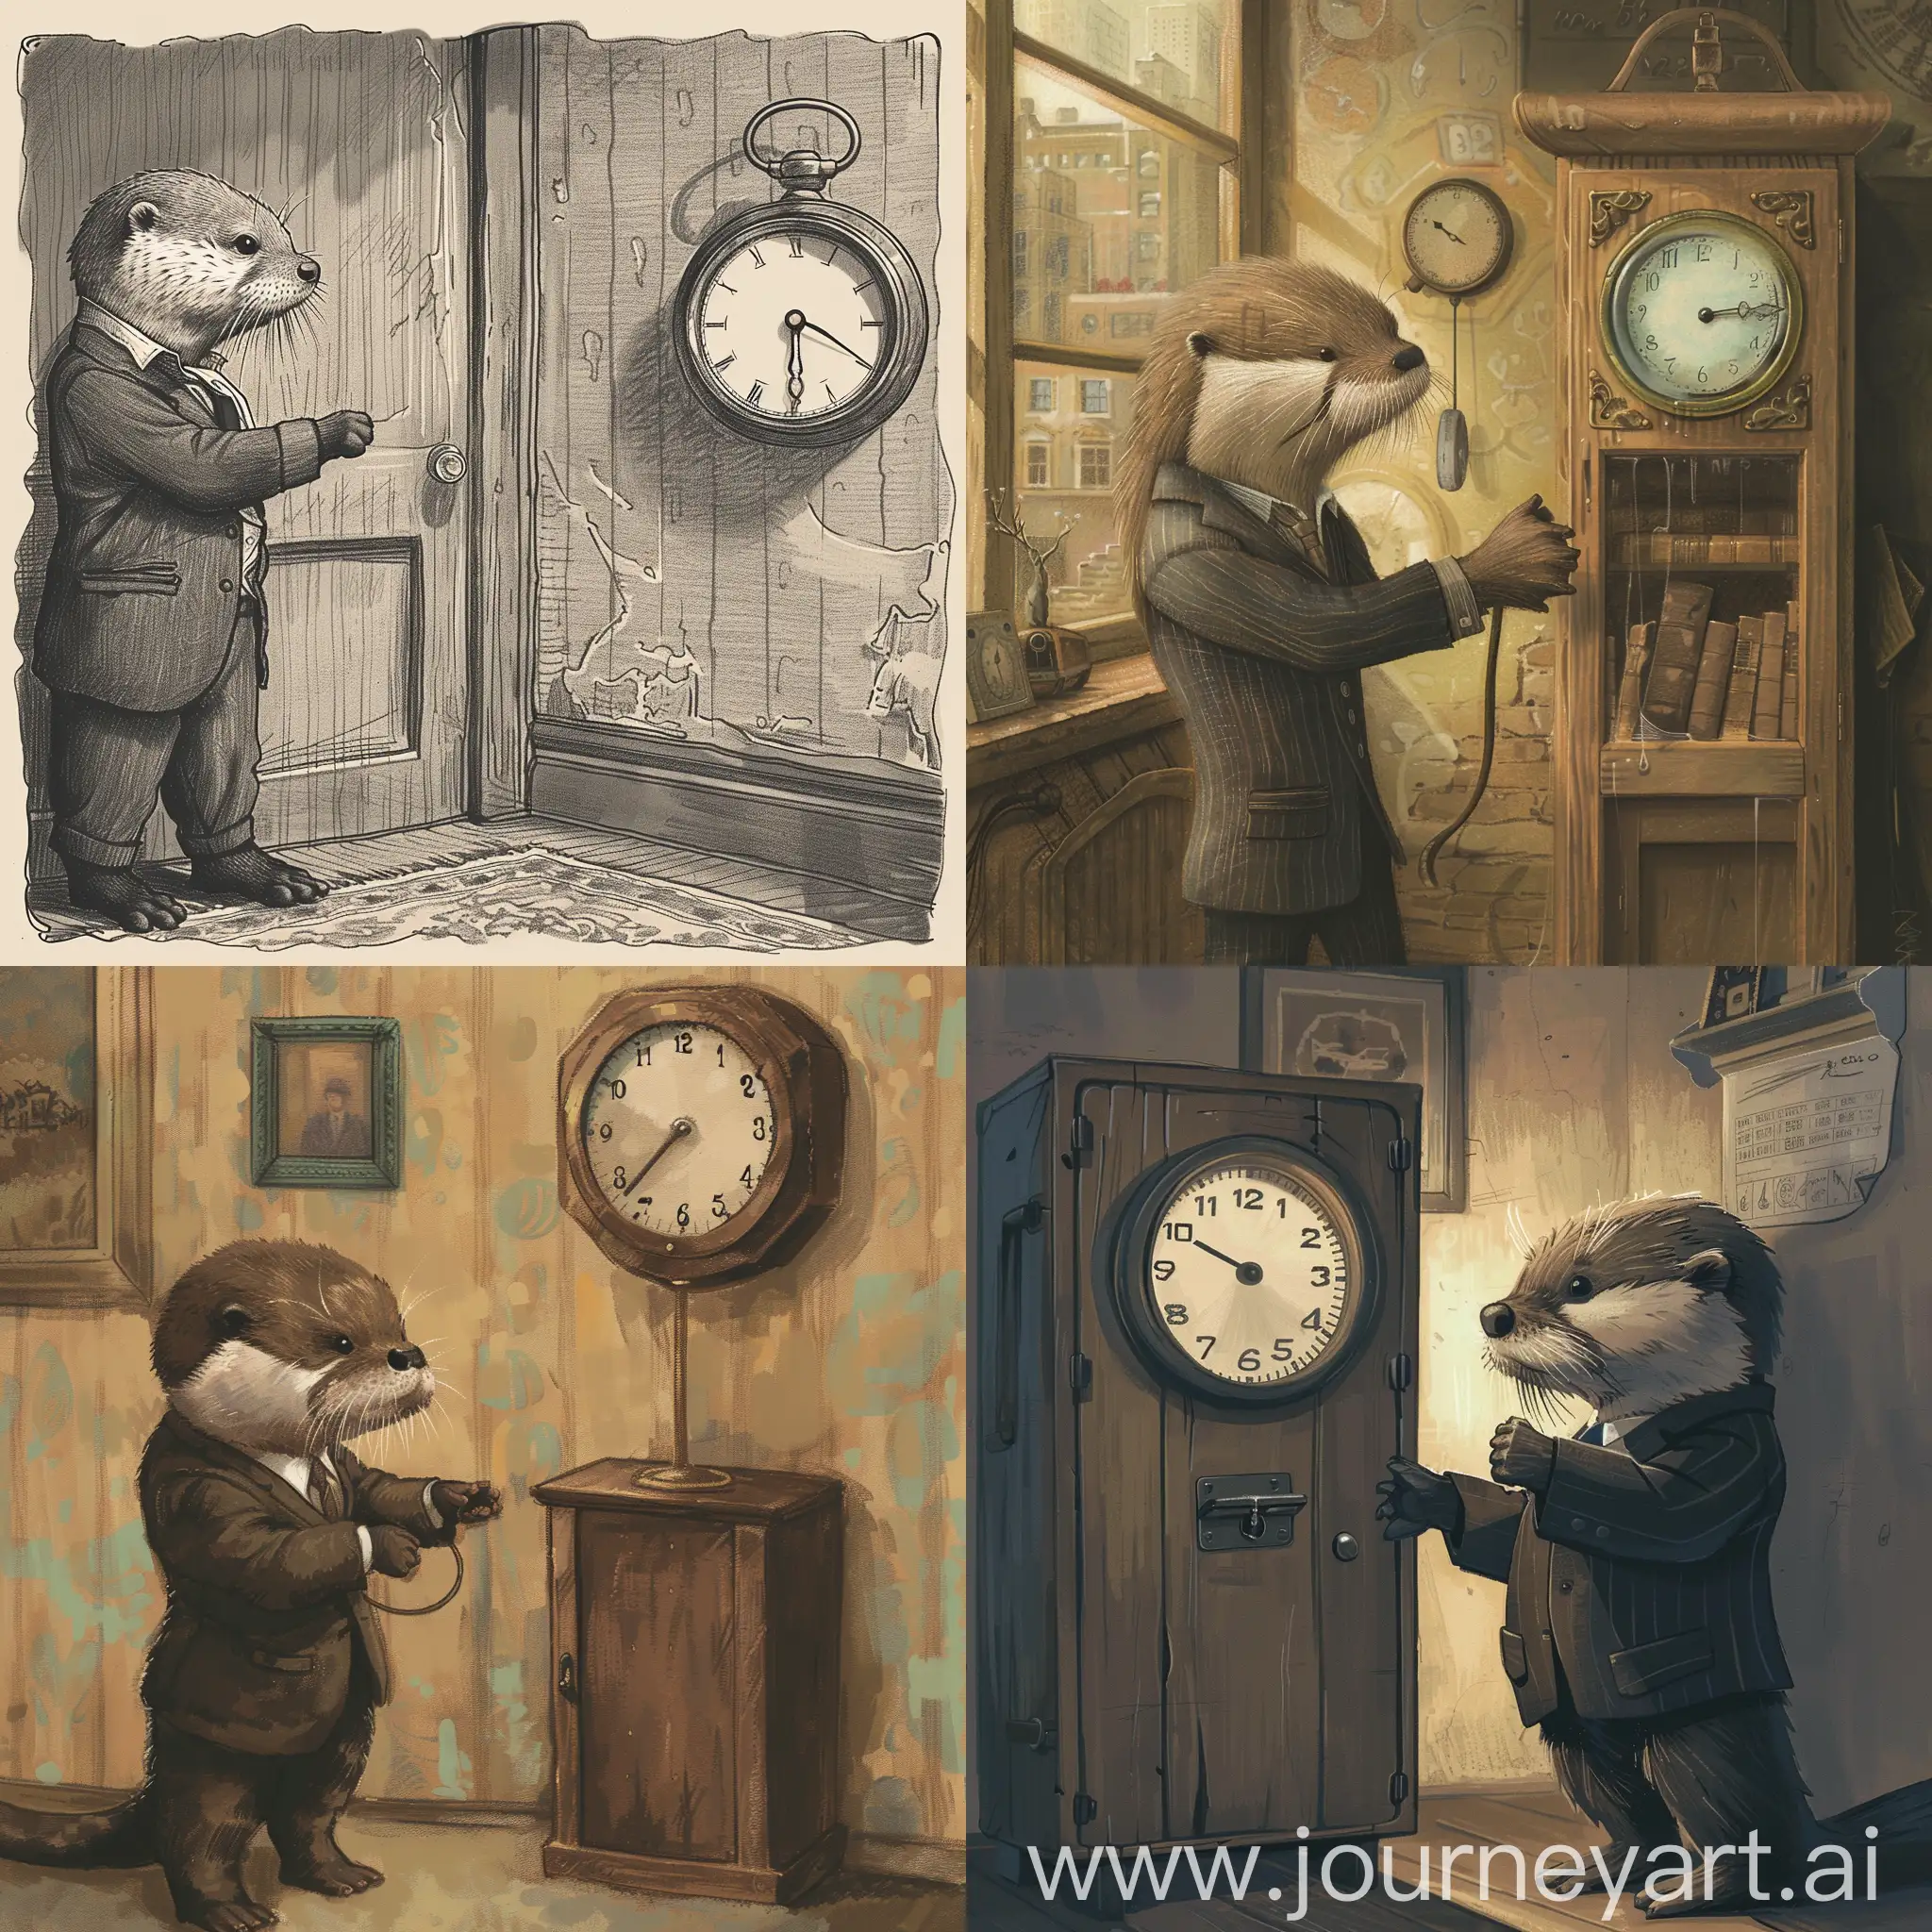 In the morning, the little otter wakes up in his cramped apartment, dressed in a neat suit, and looks at the clock on the wall, his face showing a hint of weariness.